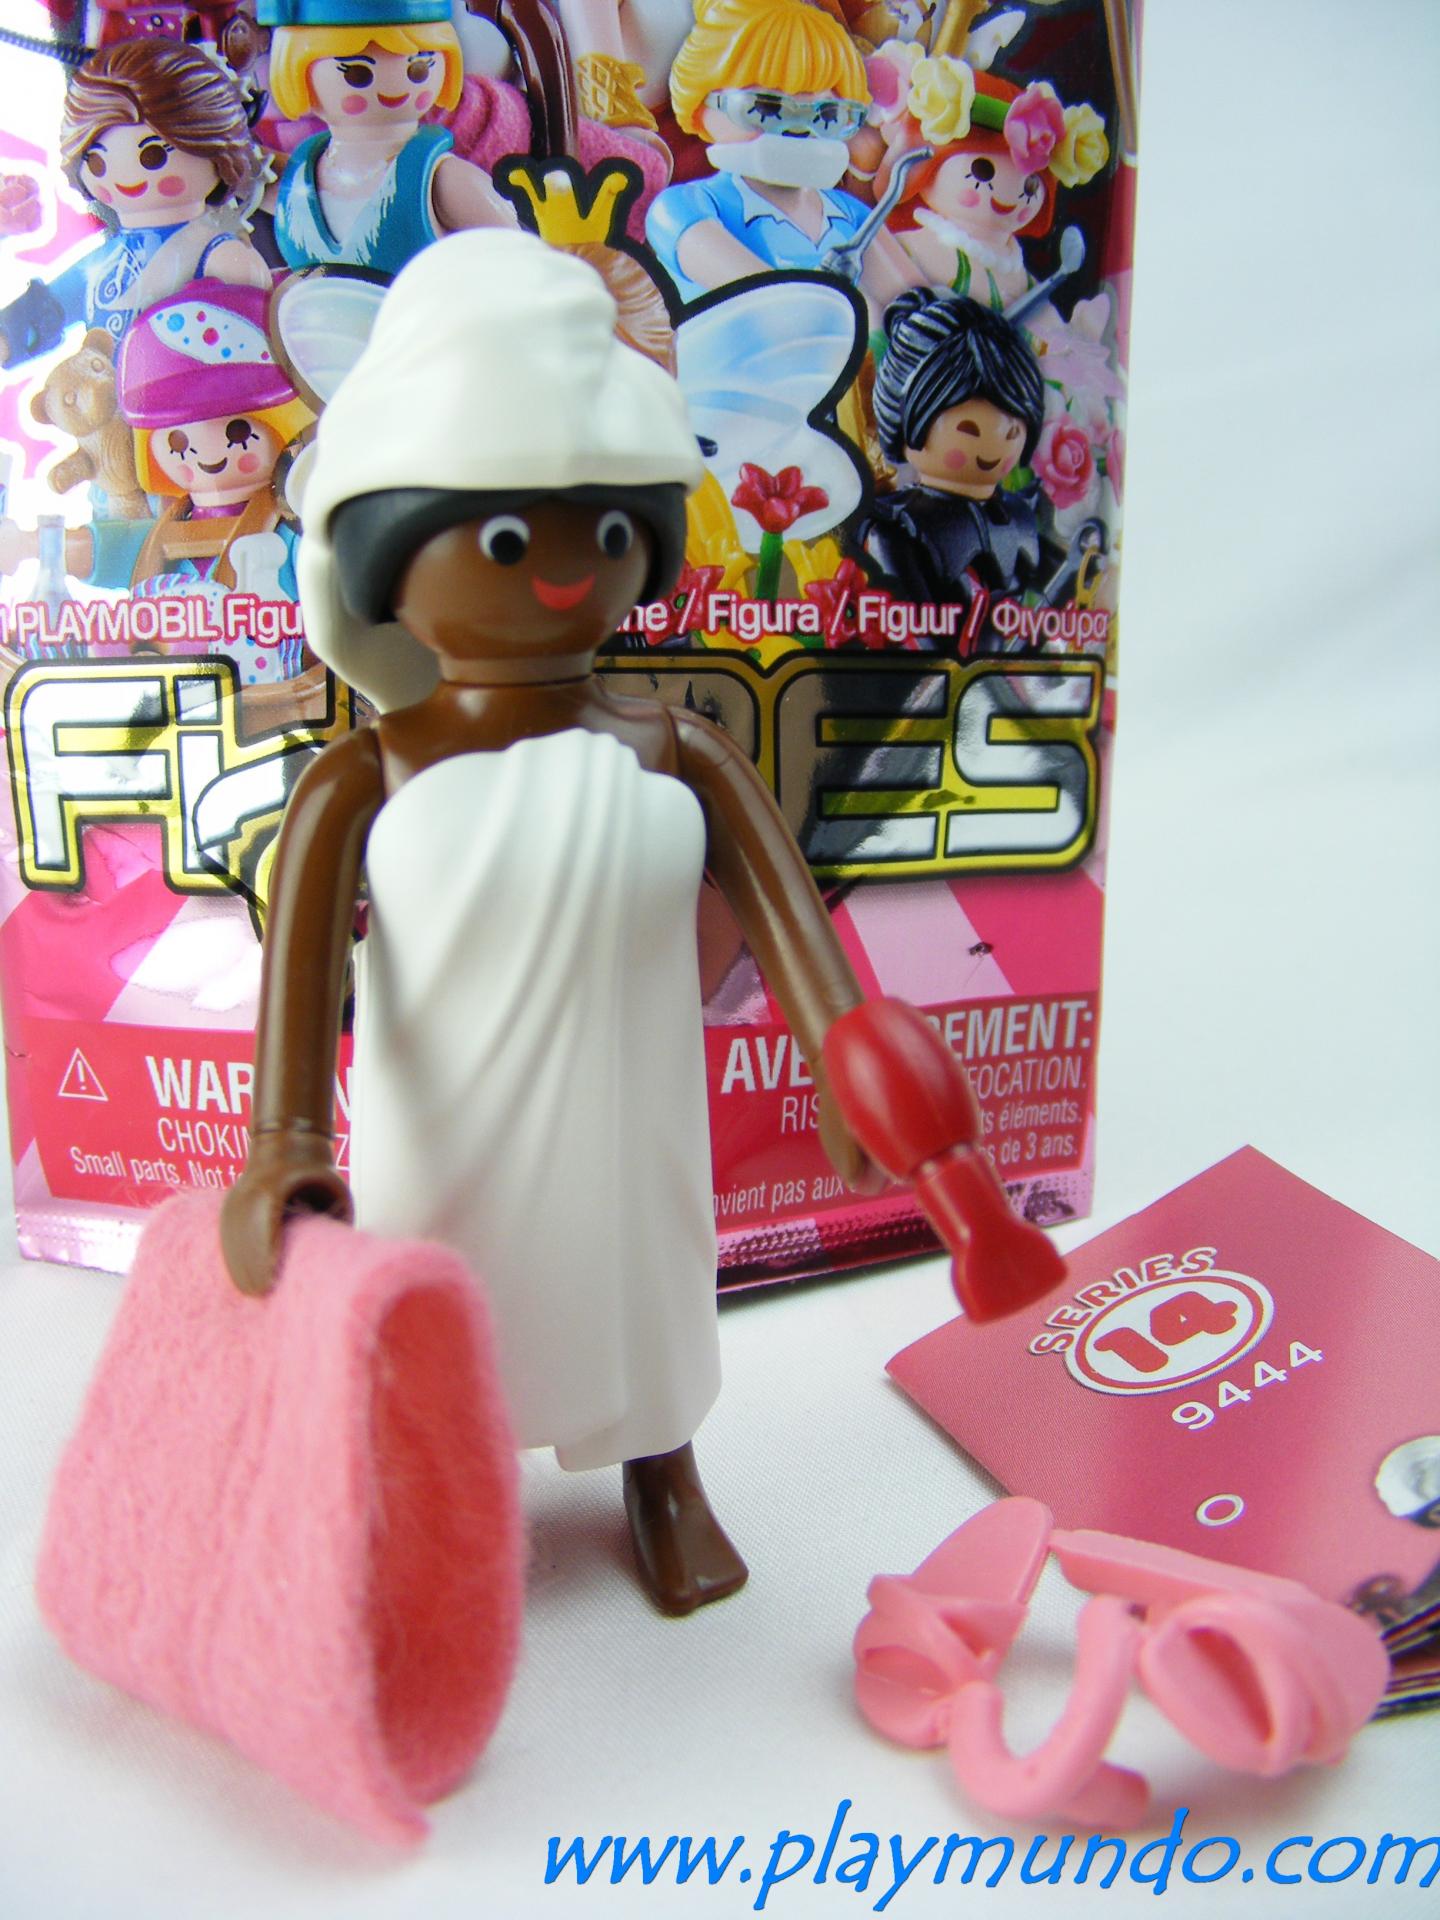 PLAYMOBIL SERIE 14 CHICAS MUJER EN TOALLA